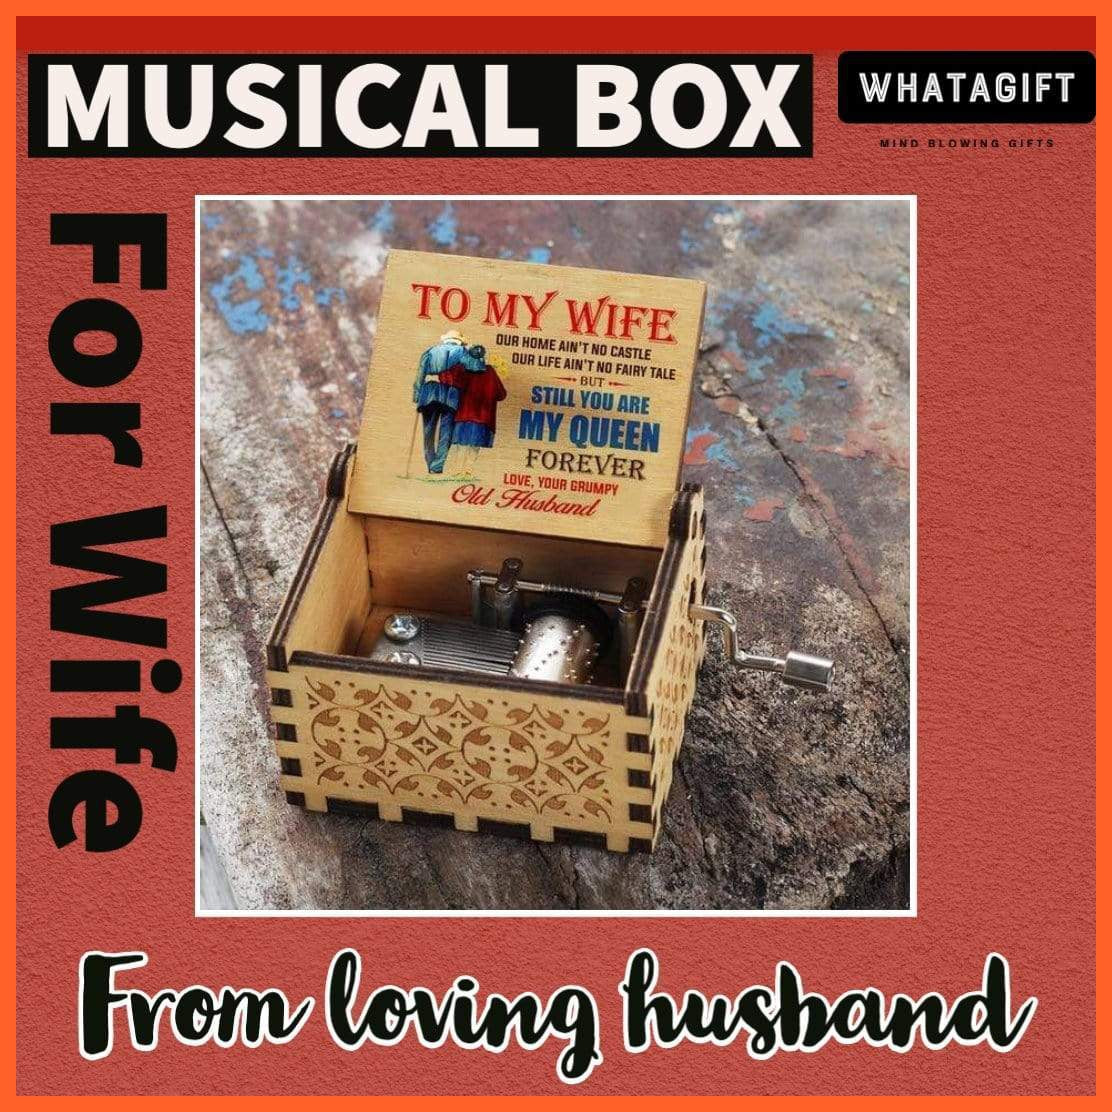 Wooden Classical Music Box For My Wife My Queen | whatagift.com.au.